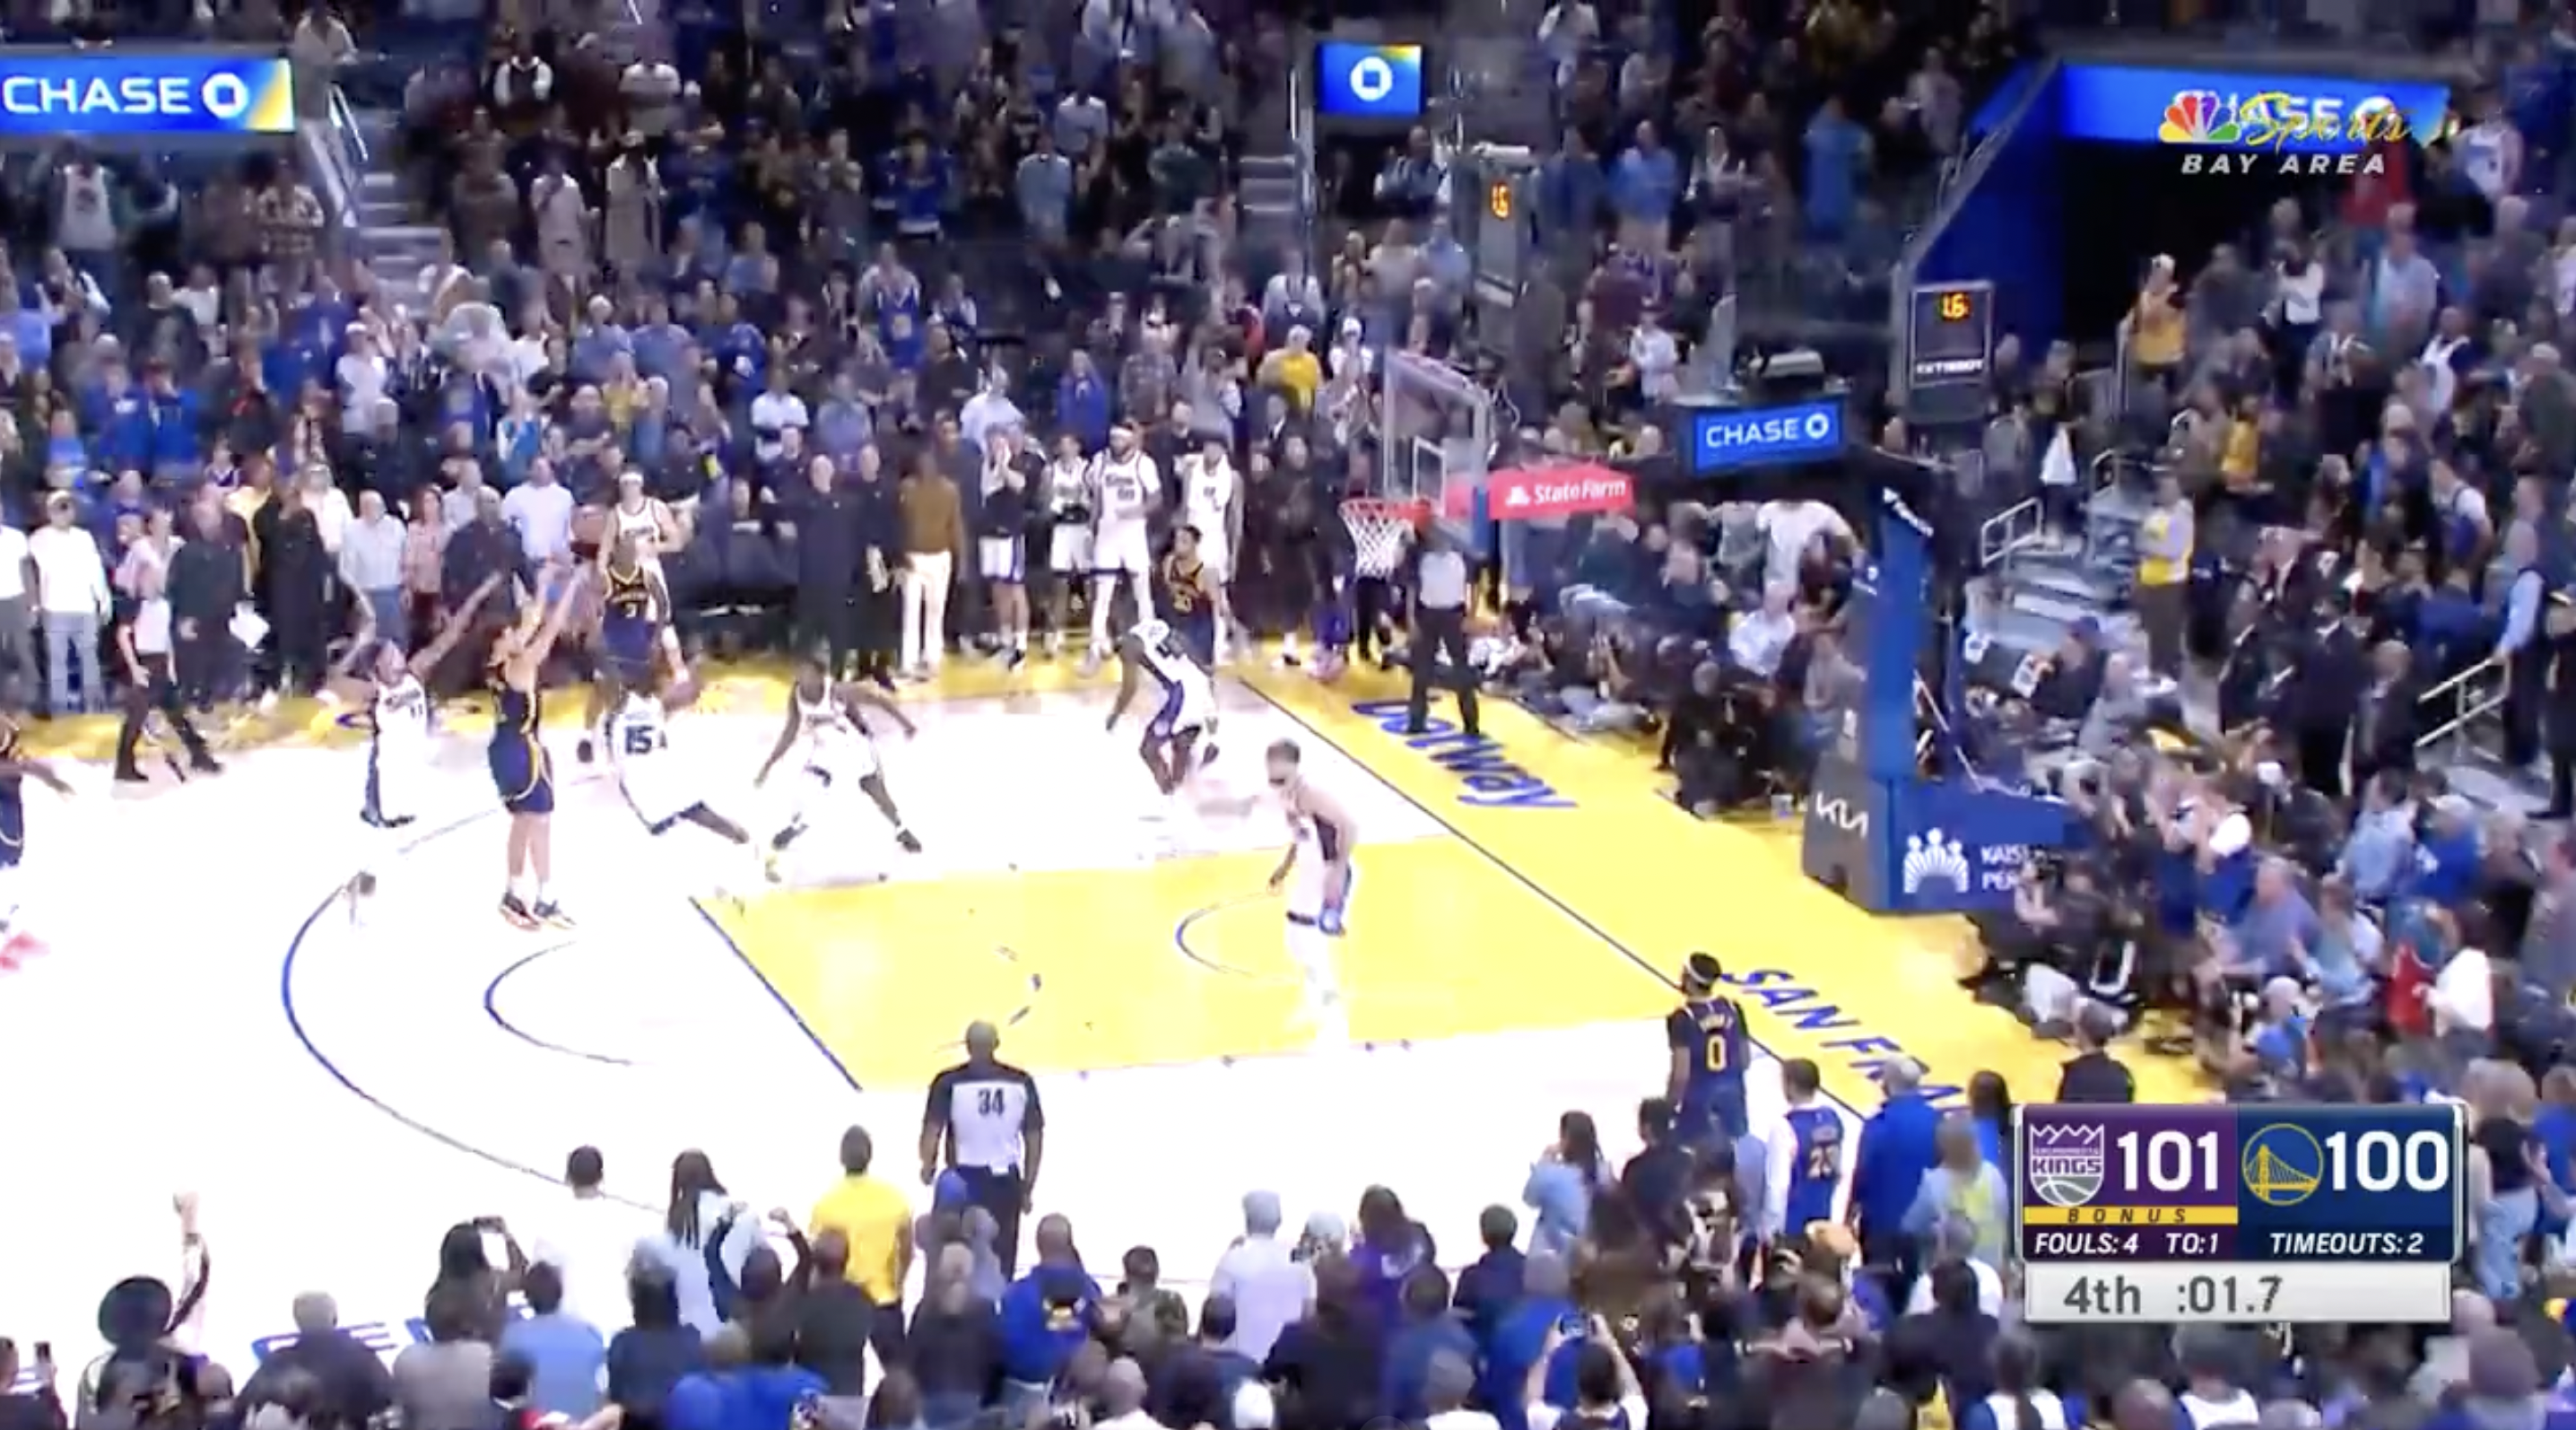 A game-winning shot from Klay Thompson against the Kings.